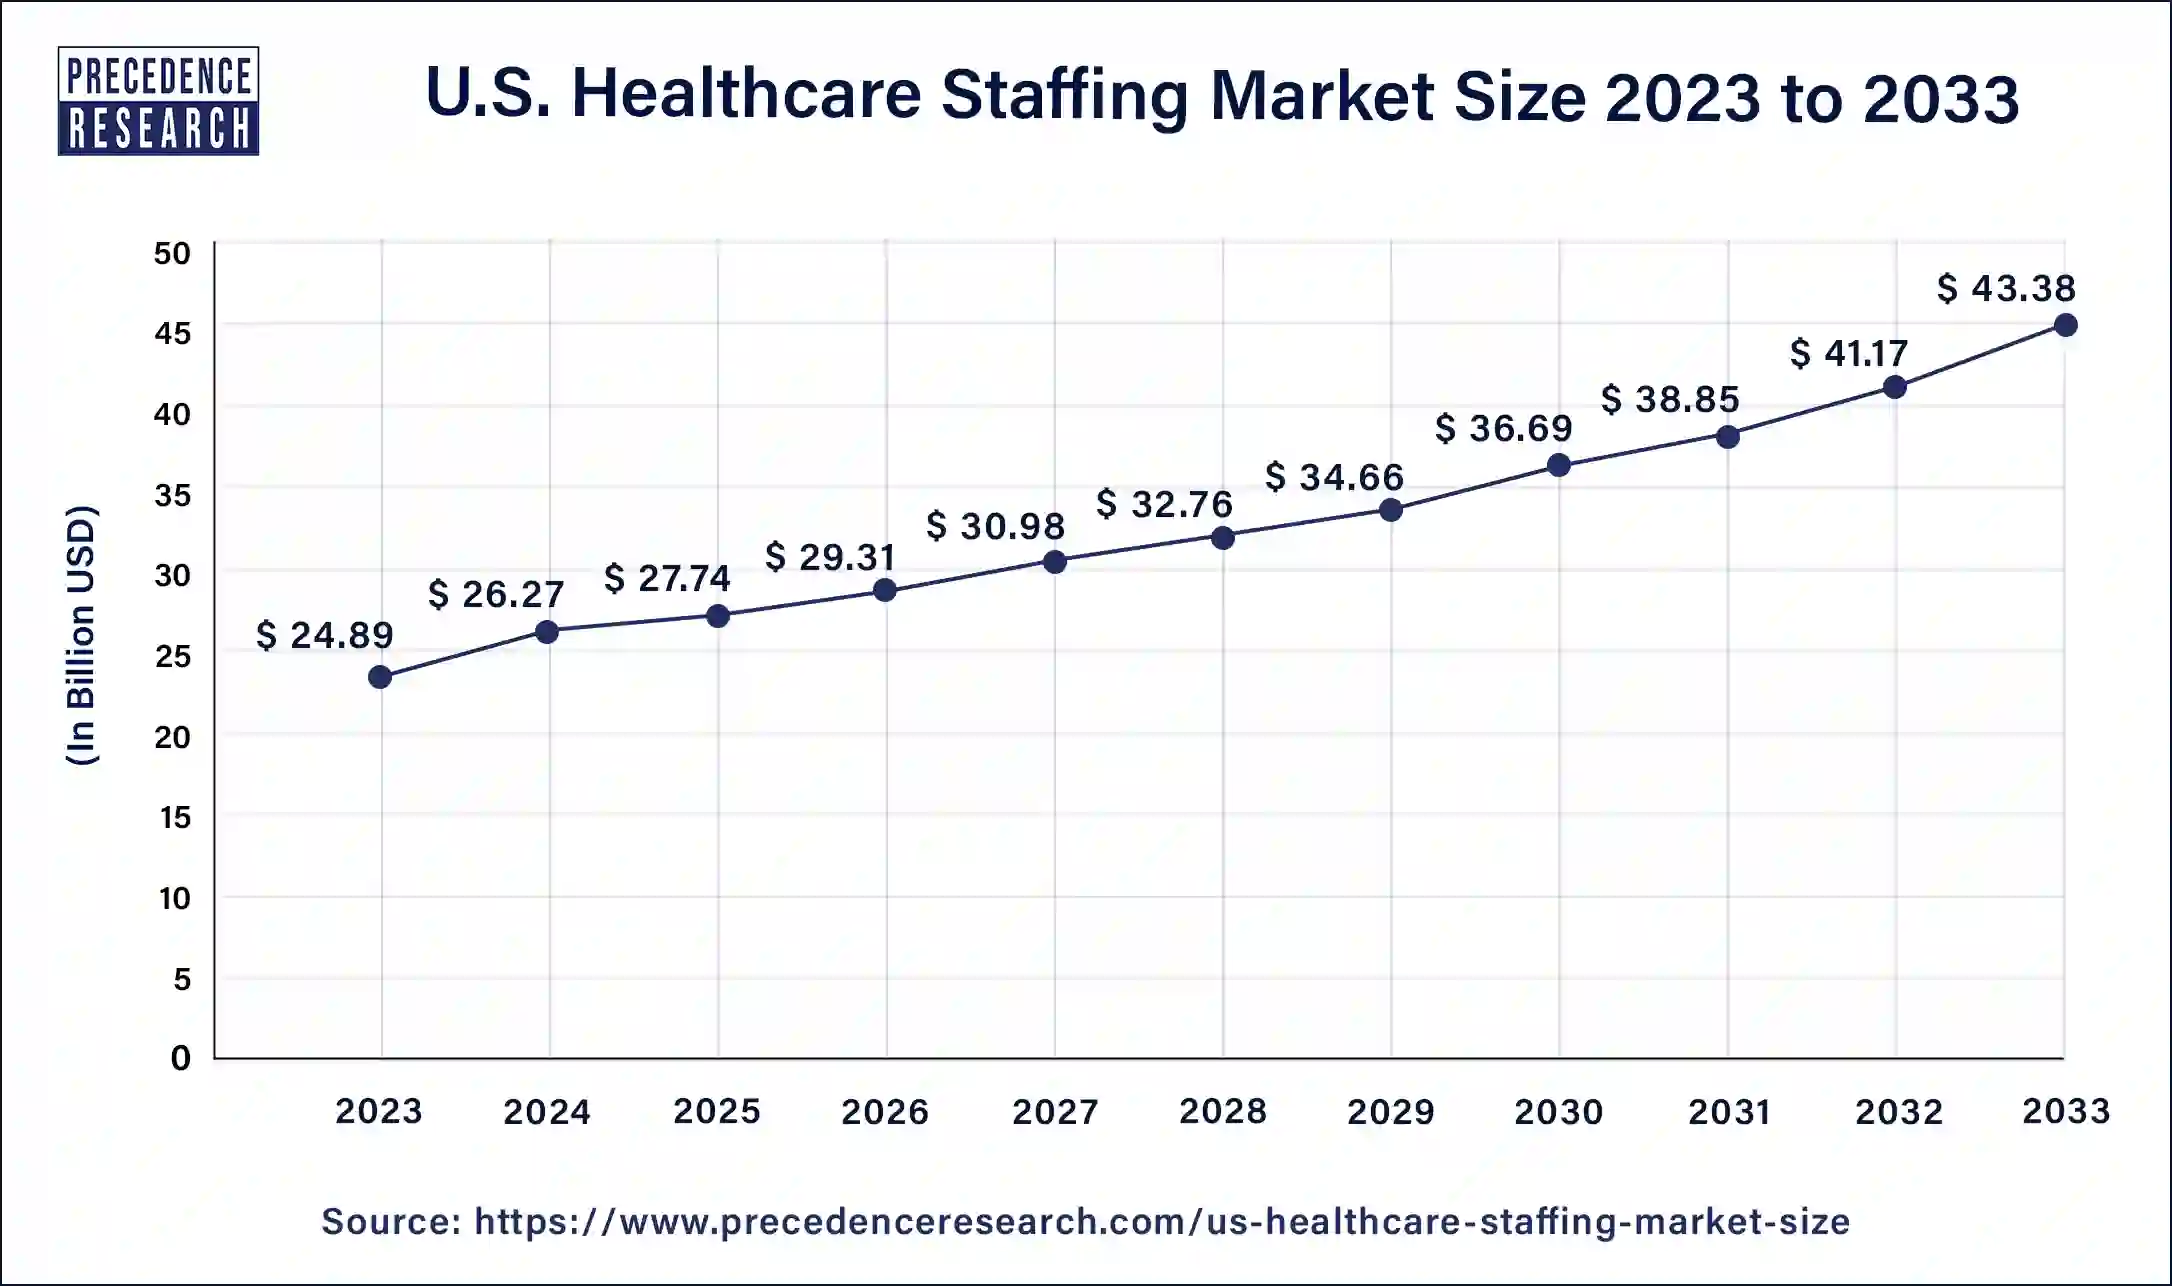 Healthcare Staffing Market Size in U.S. 2024 To 2033